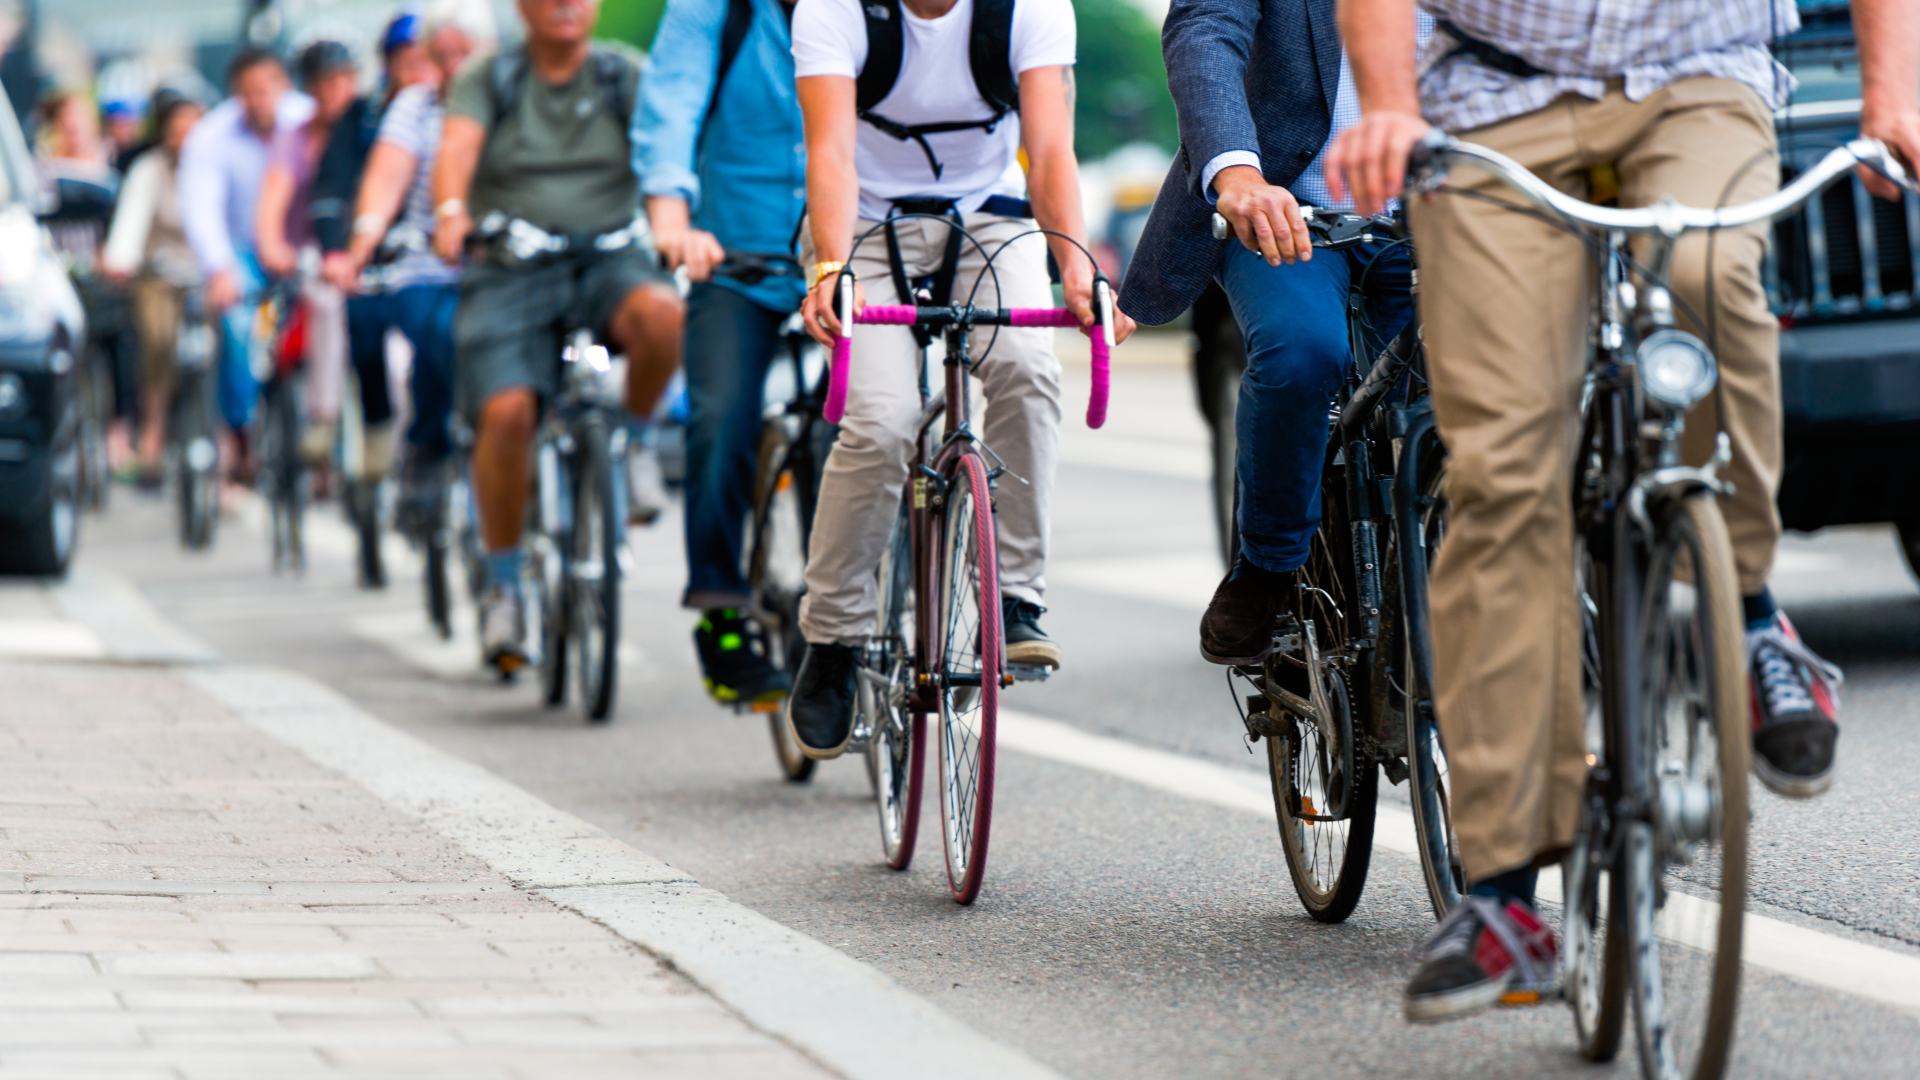 Beat the rising fuel prices and commute by bike: our top tips for